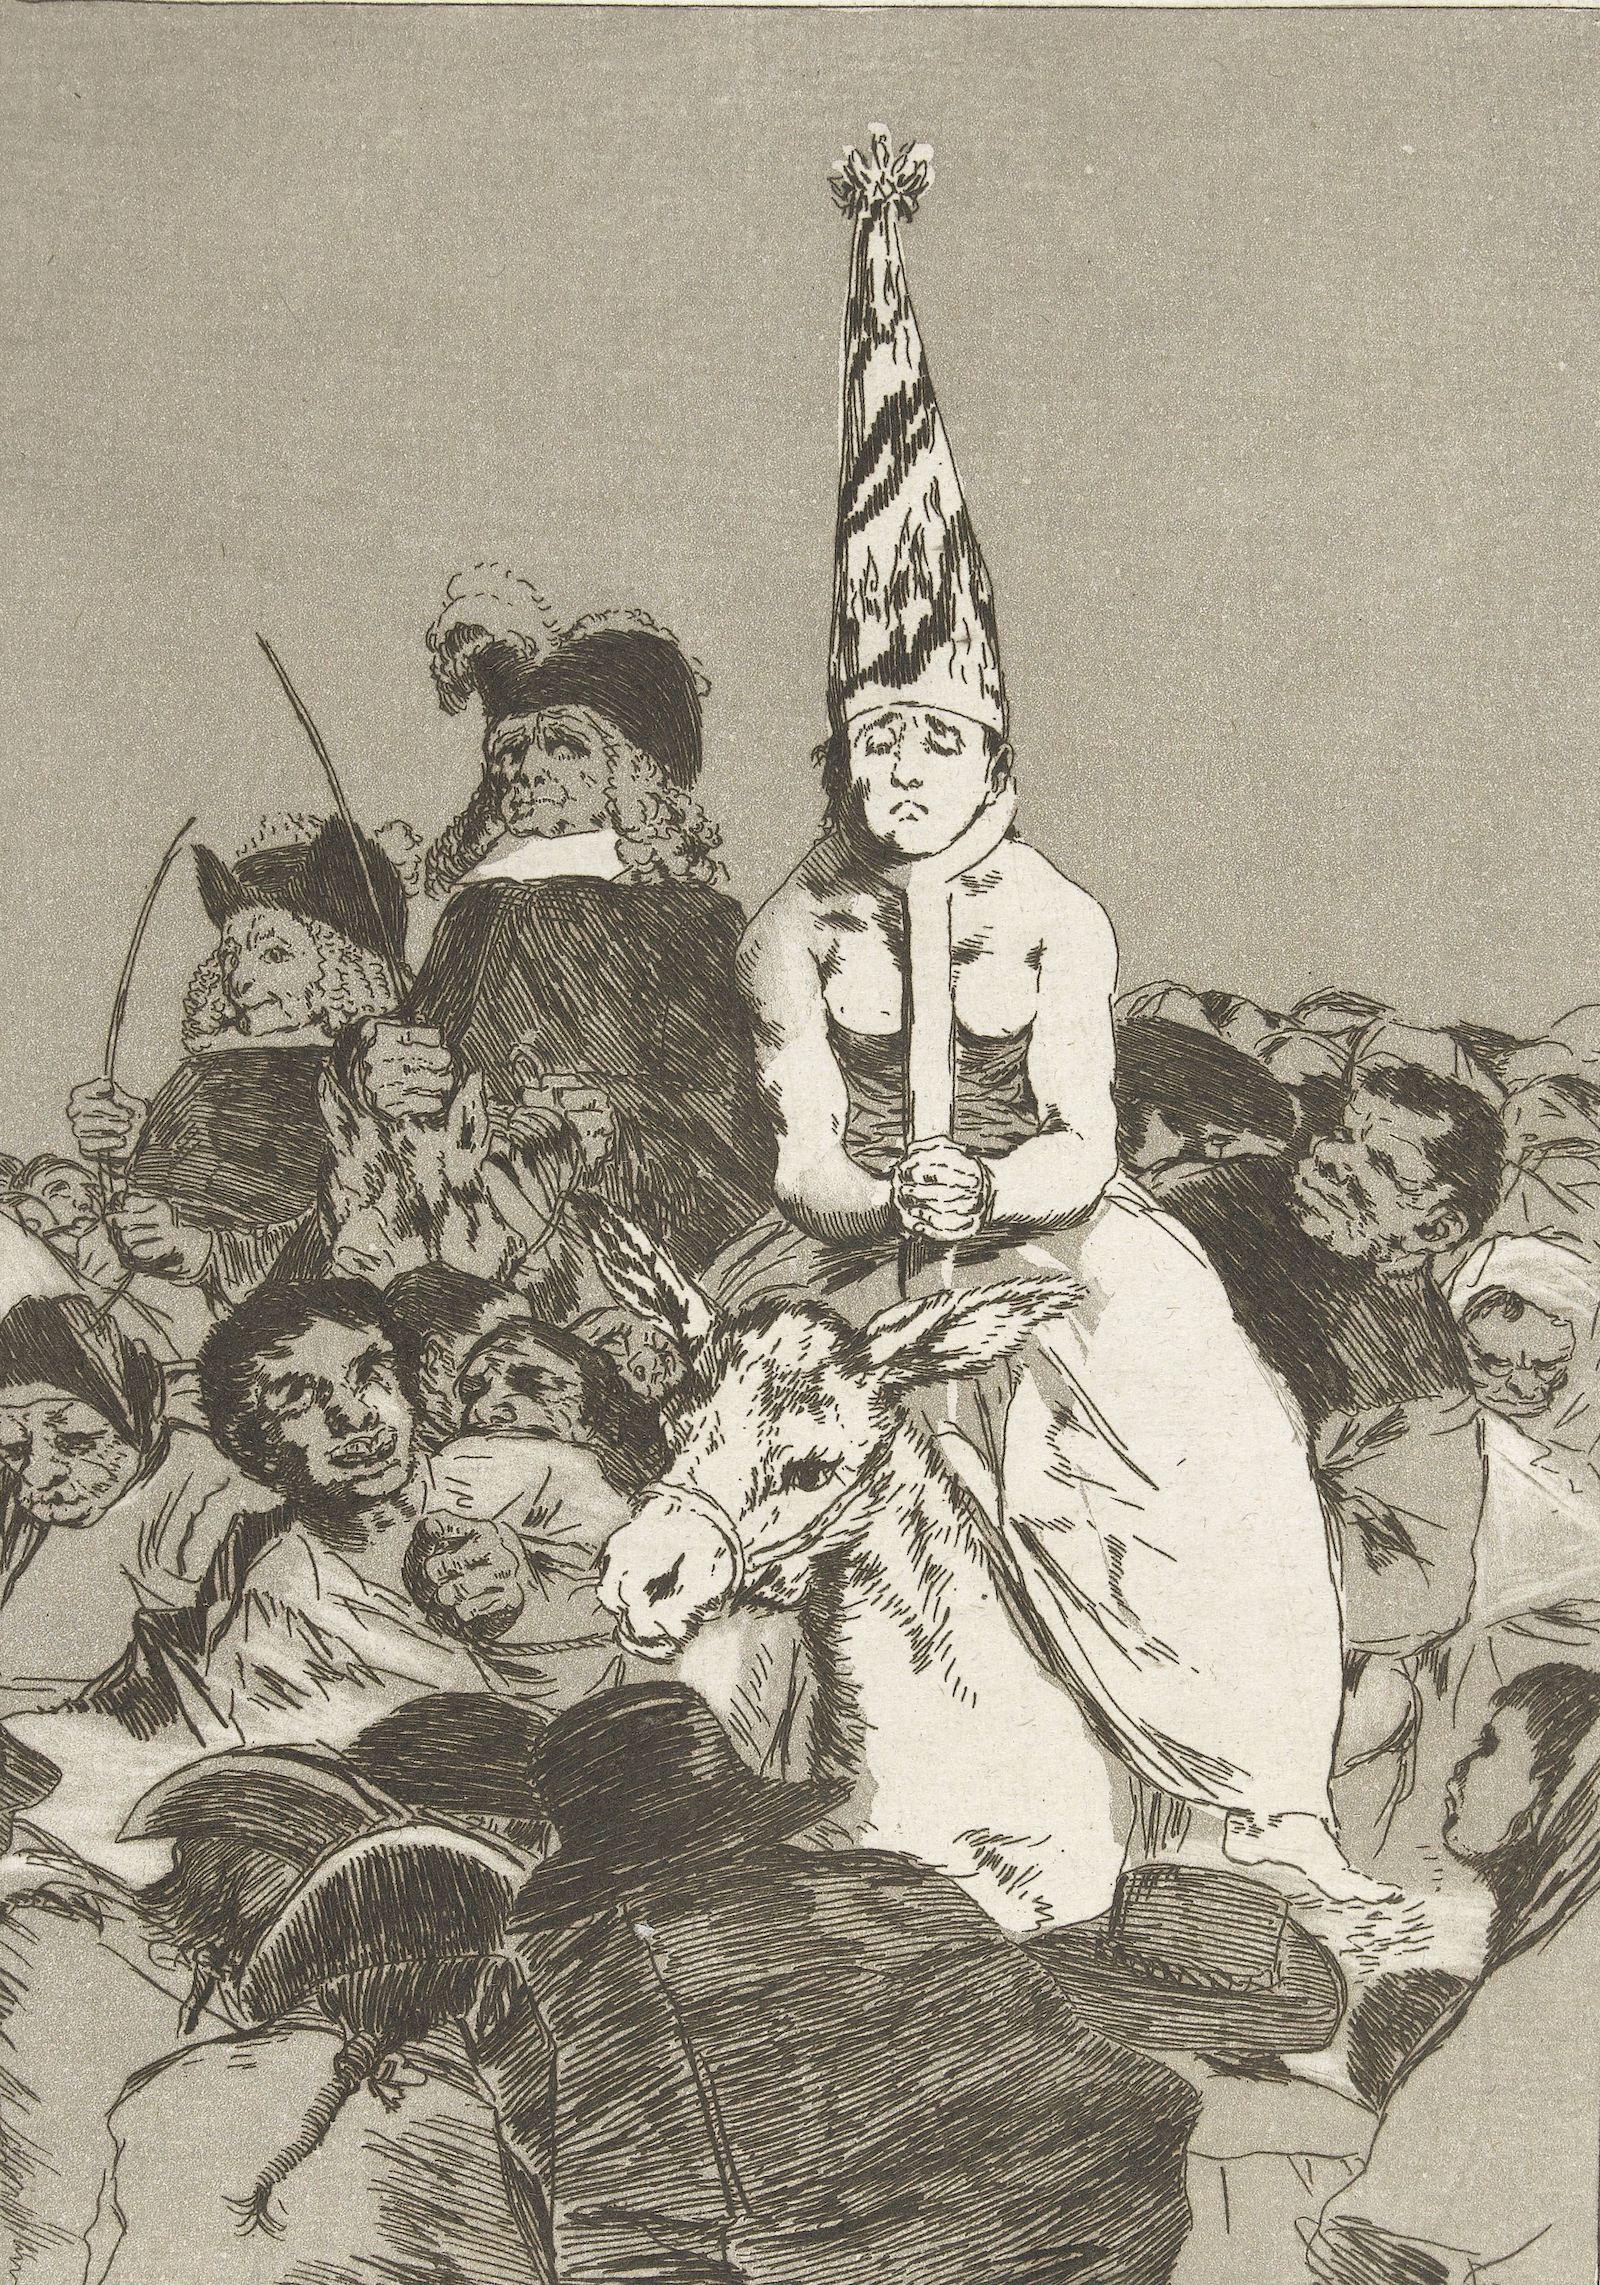 A crowd surrounds a woman condemned by the Spanish Inquisition, by Francisco de Goya, c. 1797-1799. Rijksmuseum. Public Domain.